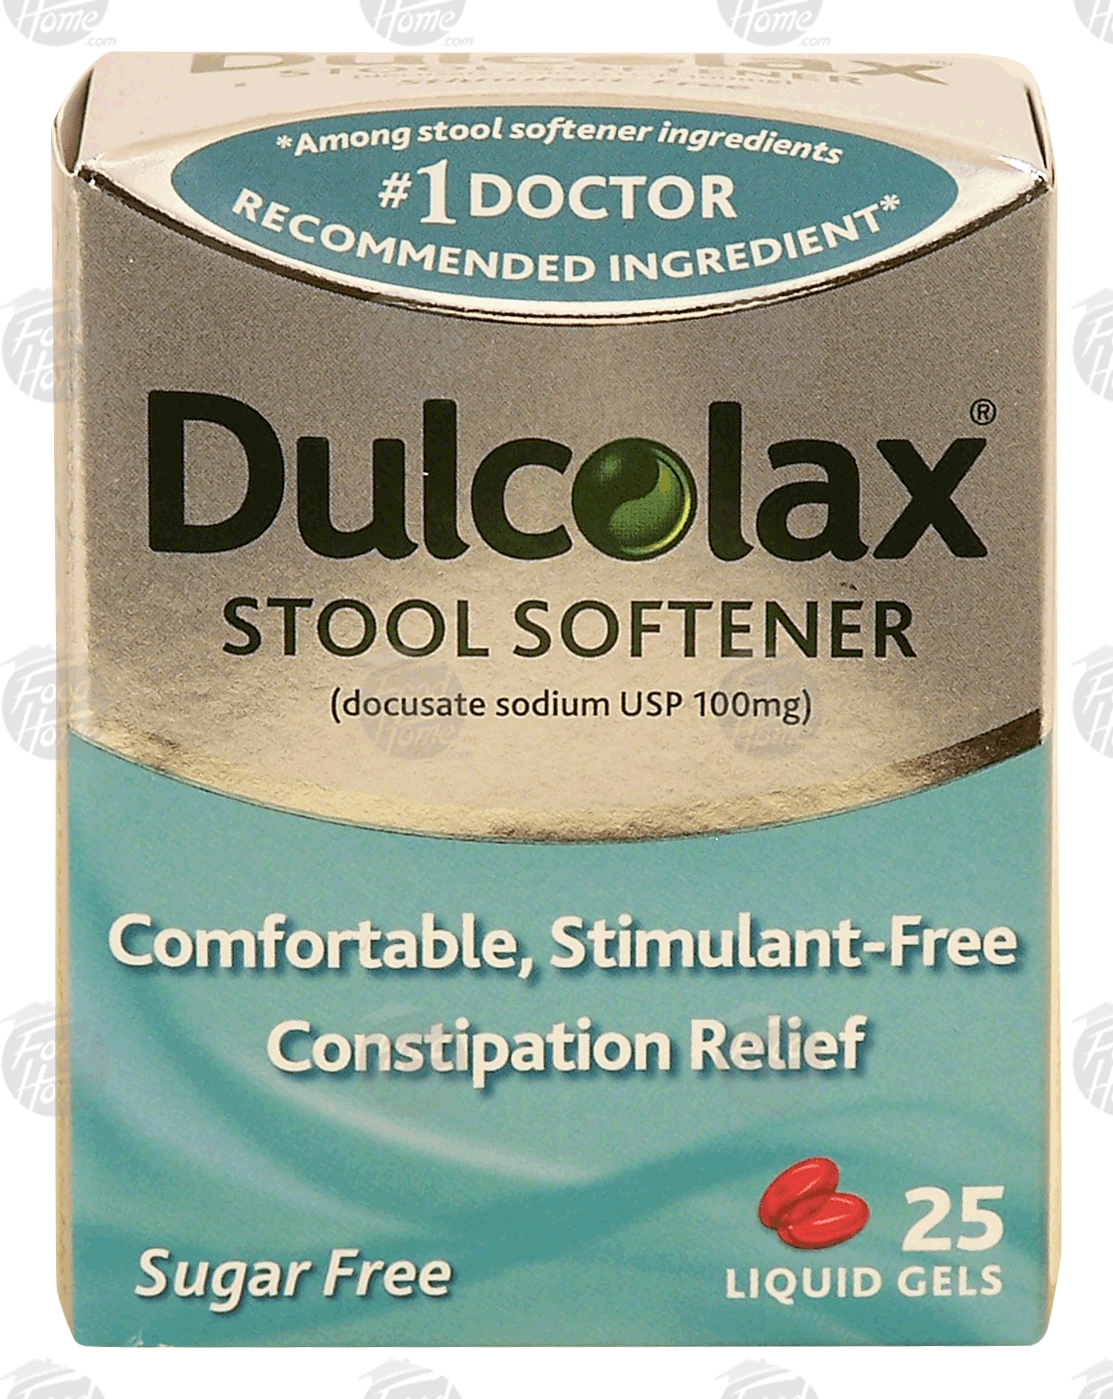 Dulcolax  stool softener liquid gel tablets Full-Size Picture